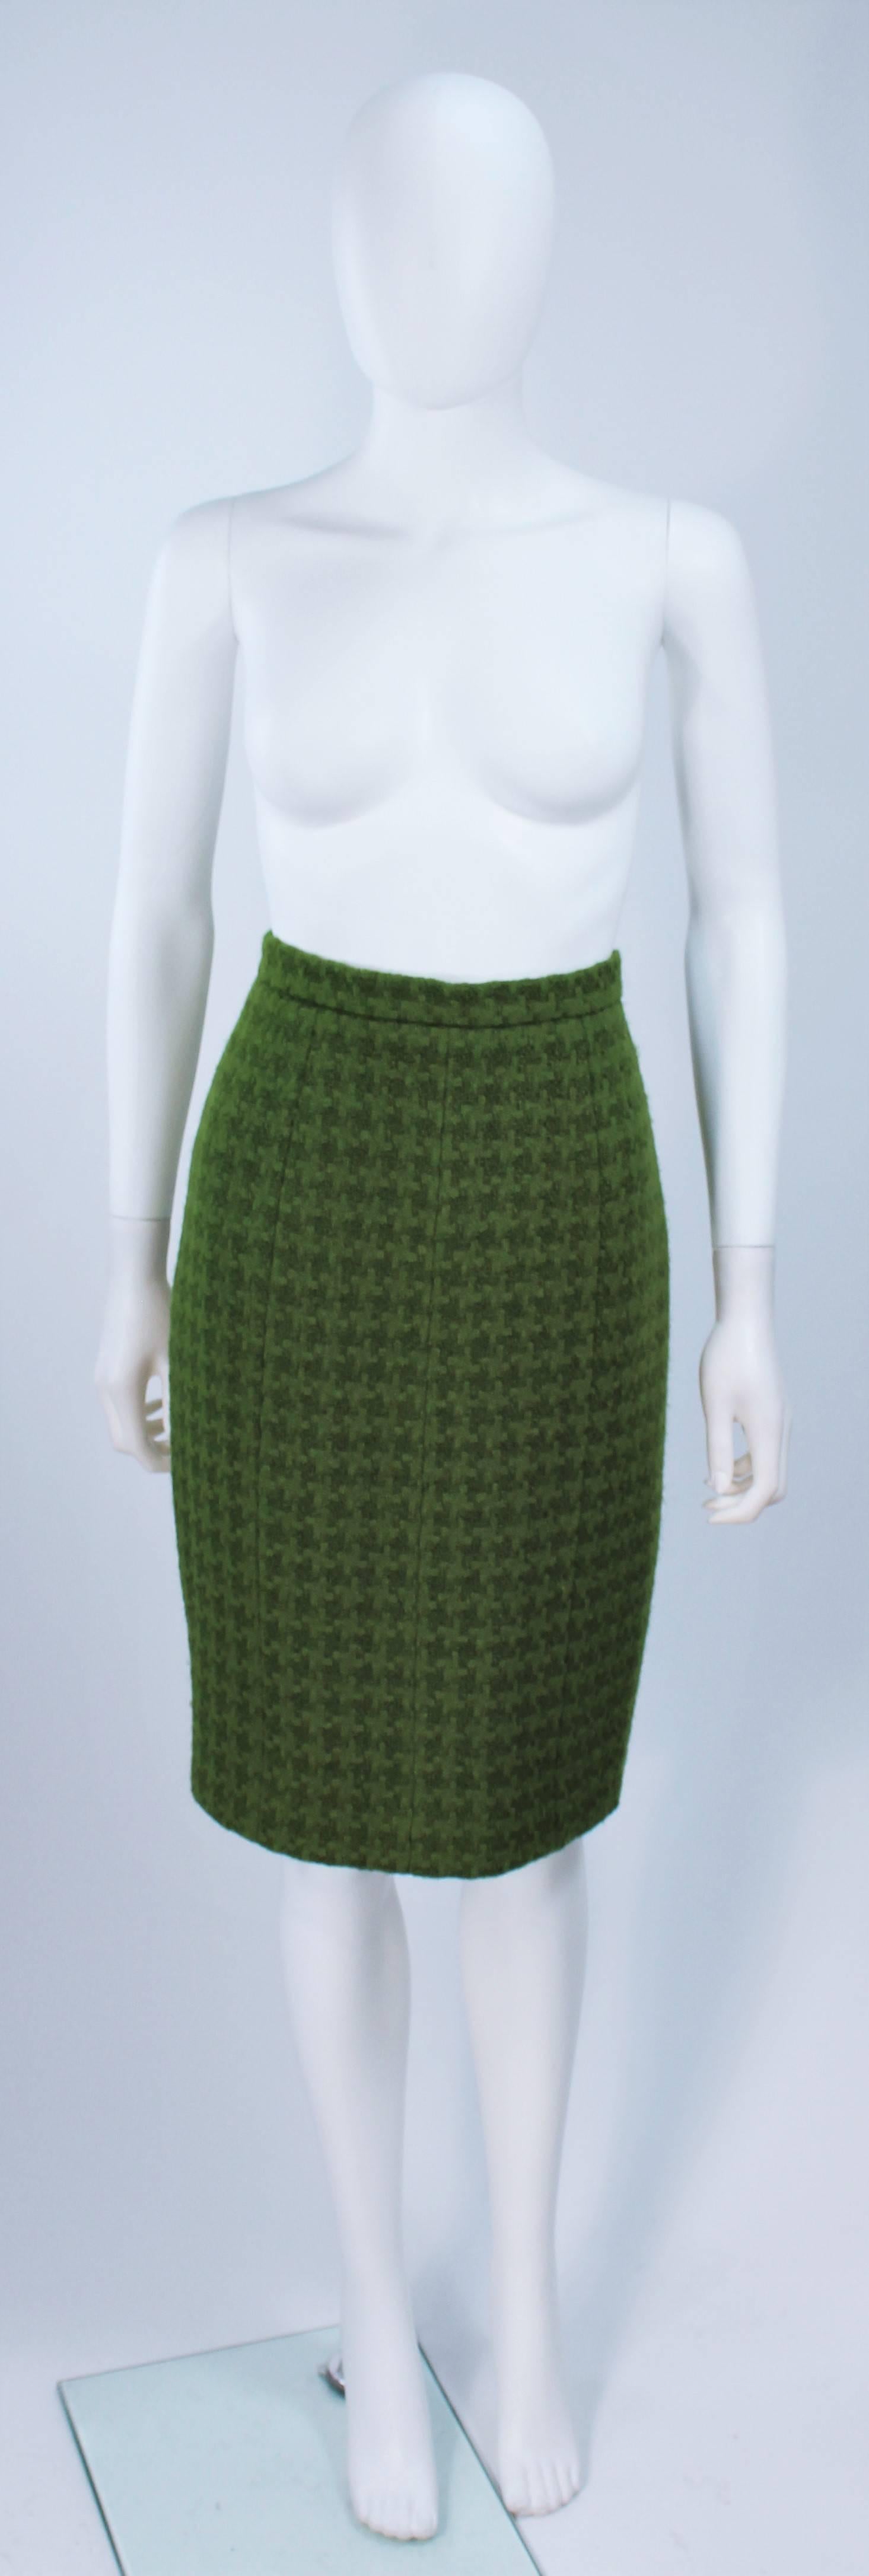 CHANEL Green Houndstooth Wool Skirt Suit Size 6-8 3